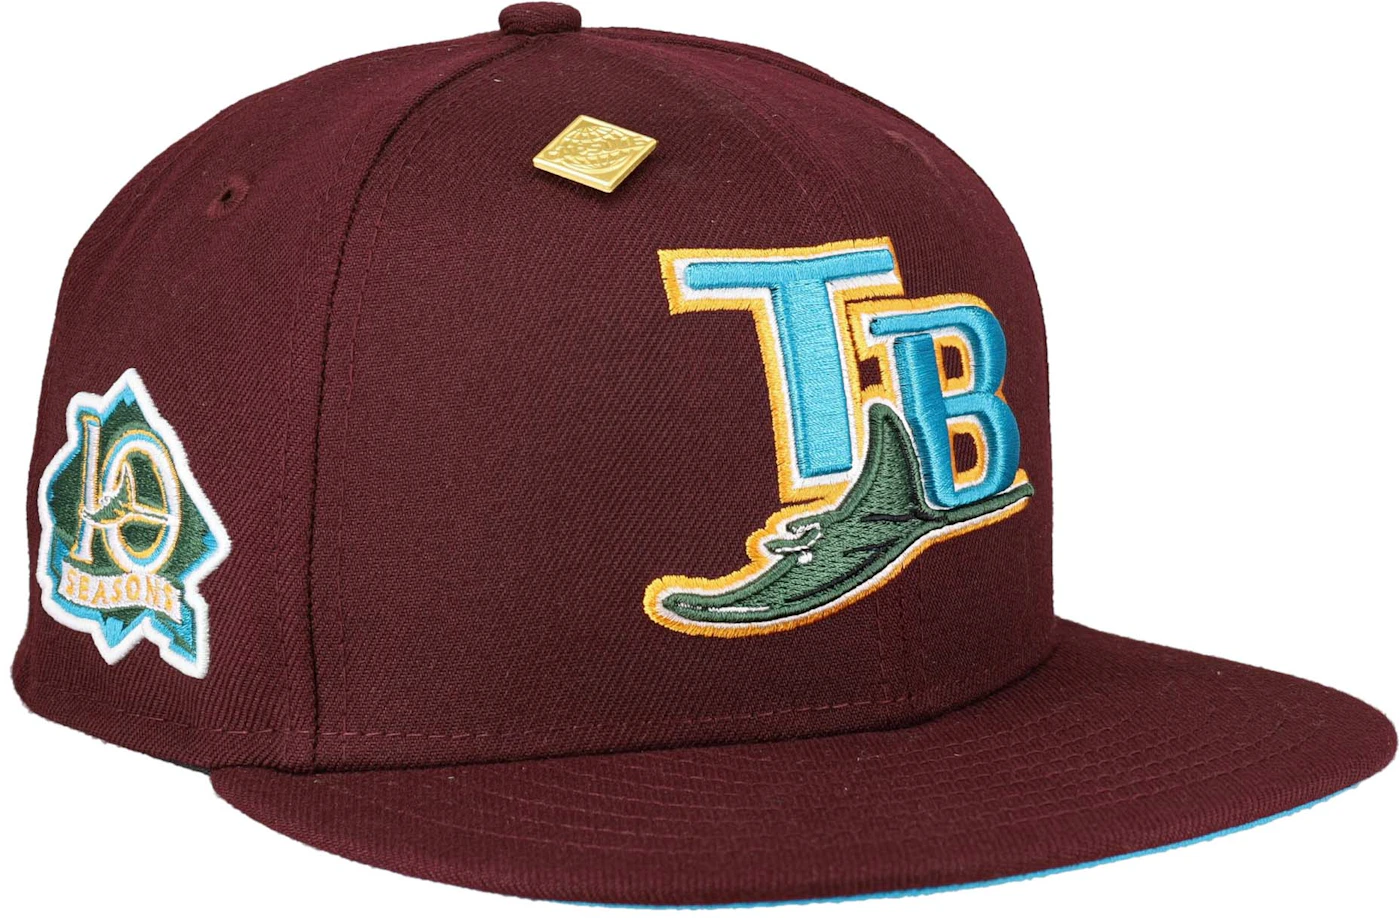 New Era Caps Tampa Bay Devil Rays 59FIFTY Fitted Hat